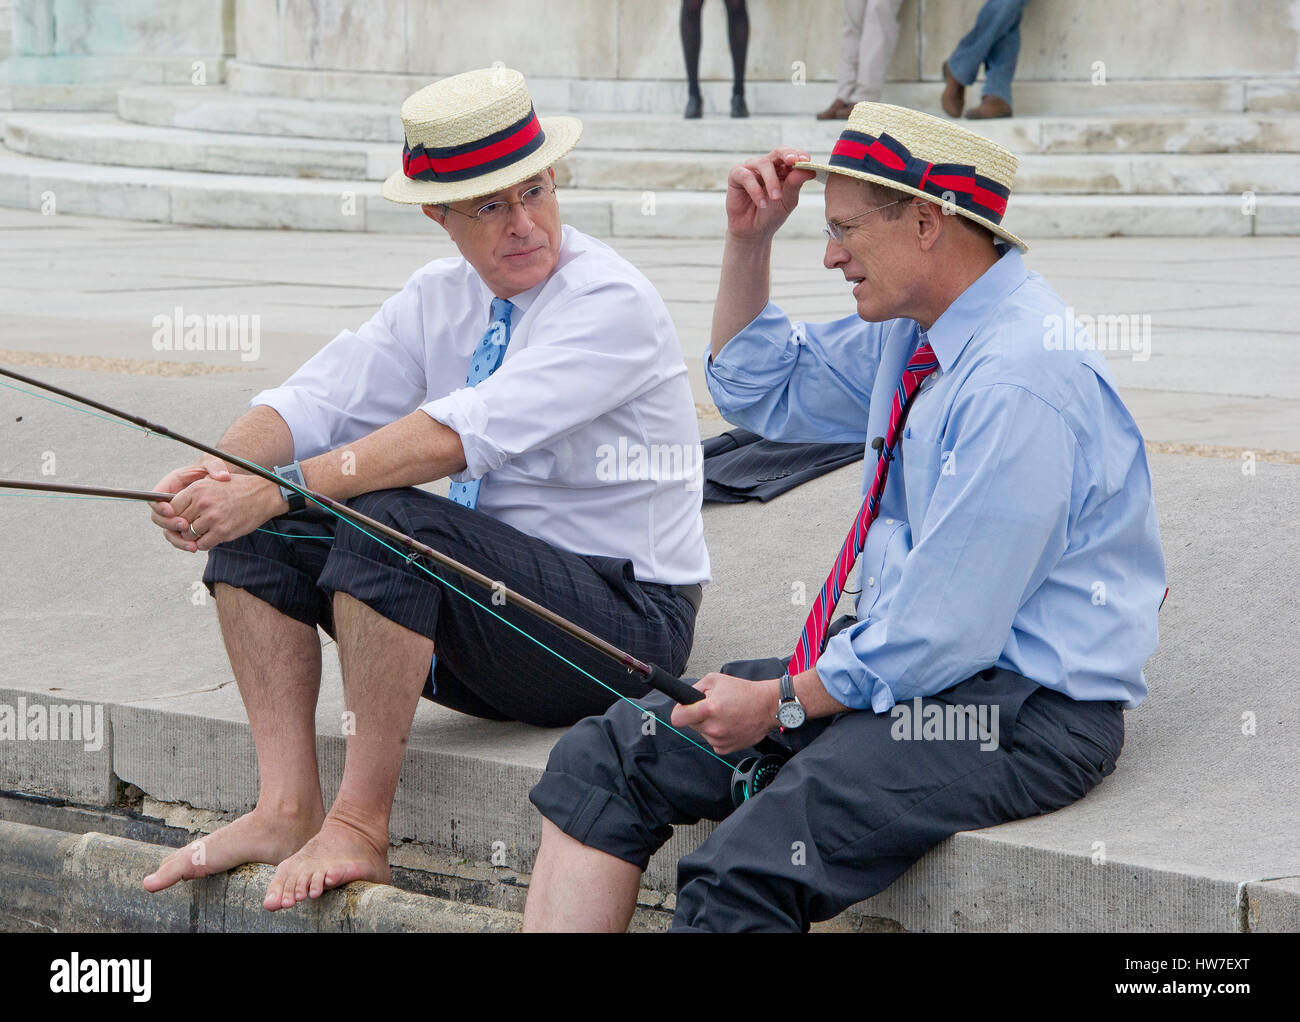 Stephen Colbert host of the Comedy Central show 'The Colbert Report' works on bit with United States Representative Jack Kingston (Democrat of Georgia) where they appear to be fishing in U.S. Capitol Reflecting Pool in Washington D.C. on Friday October 3 Stock Photo